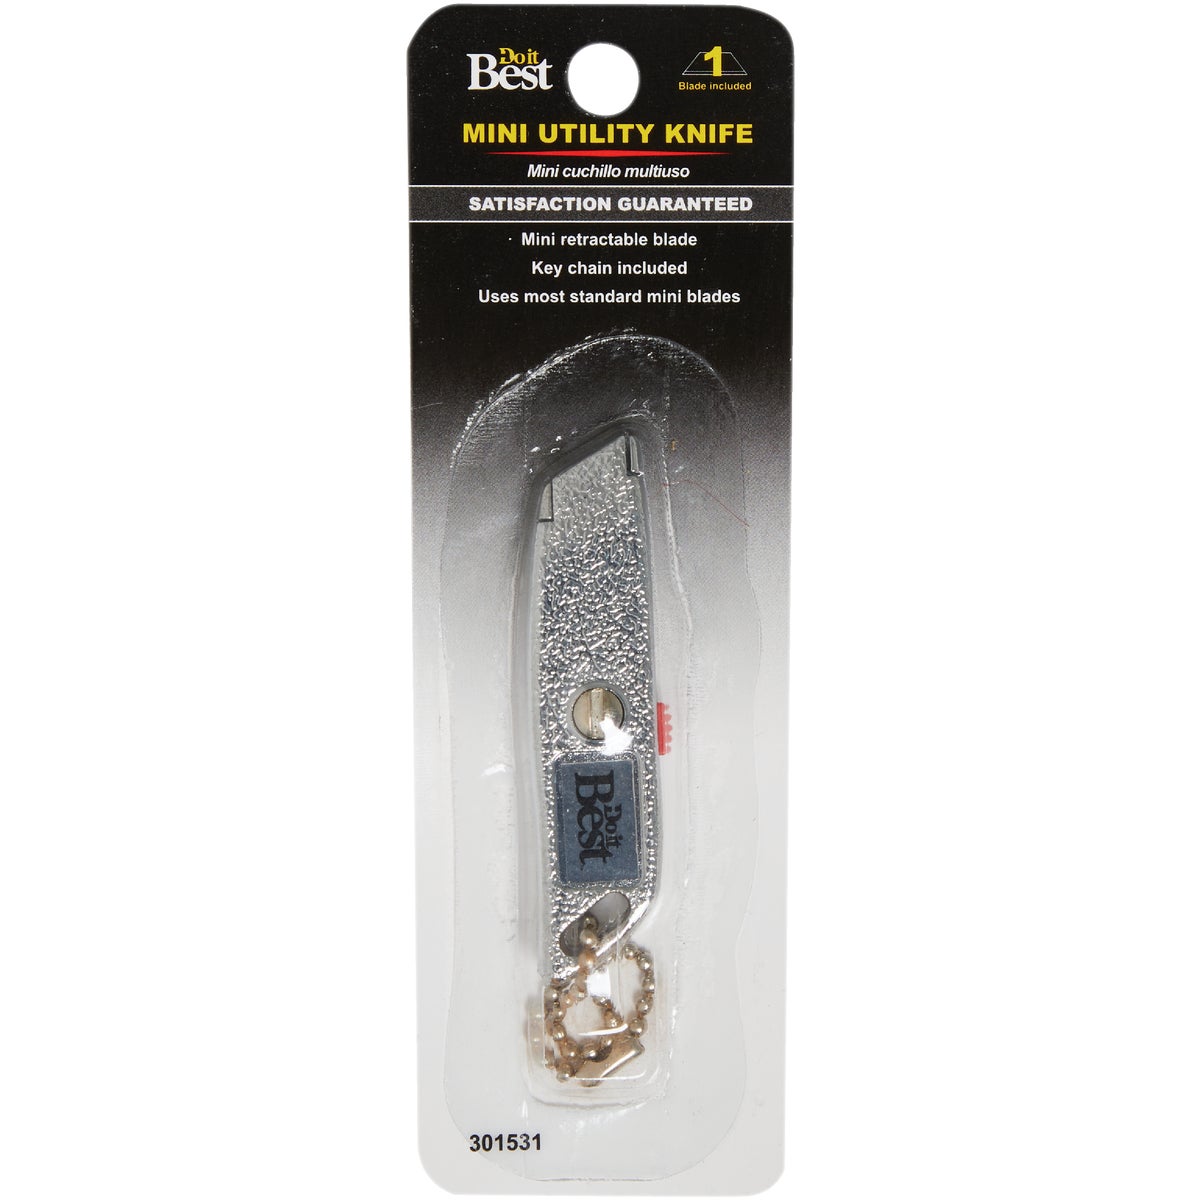 Item 301531, The die cast chrome pocket sized utility knife is perfect for small or 